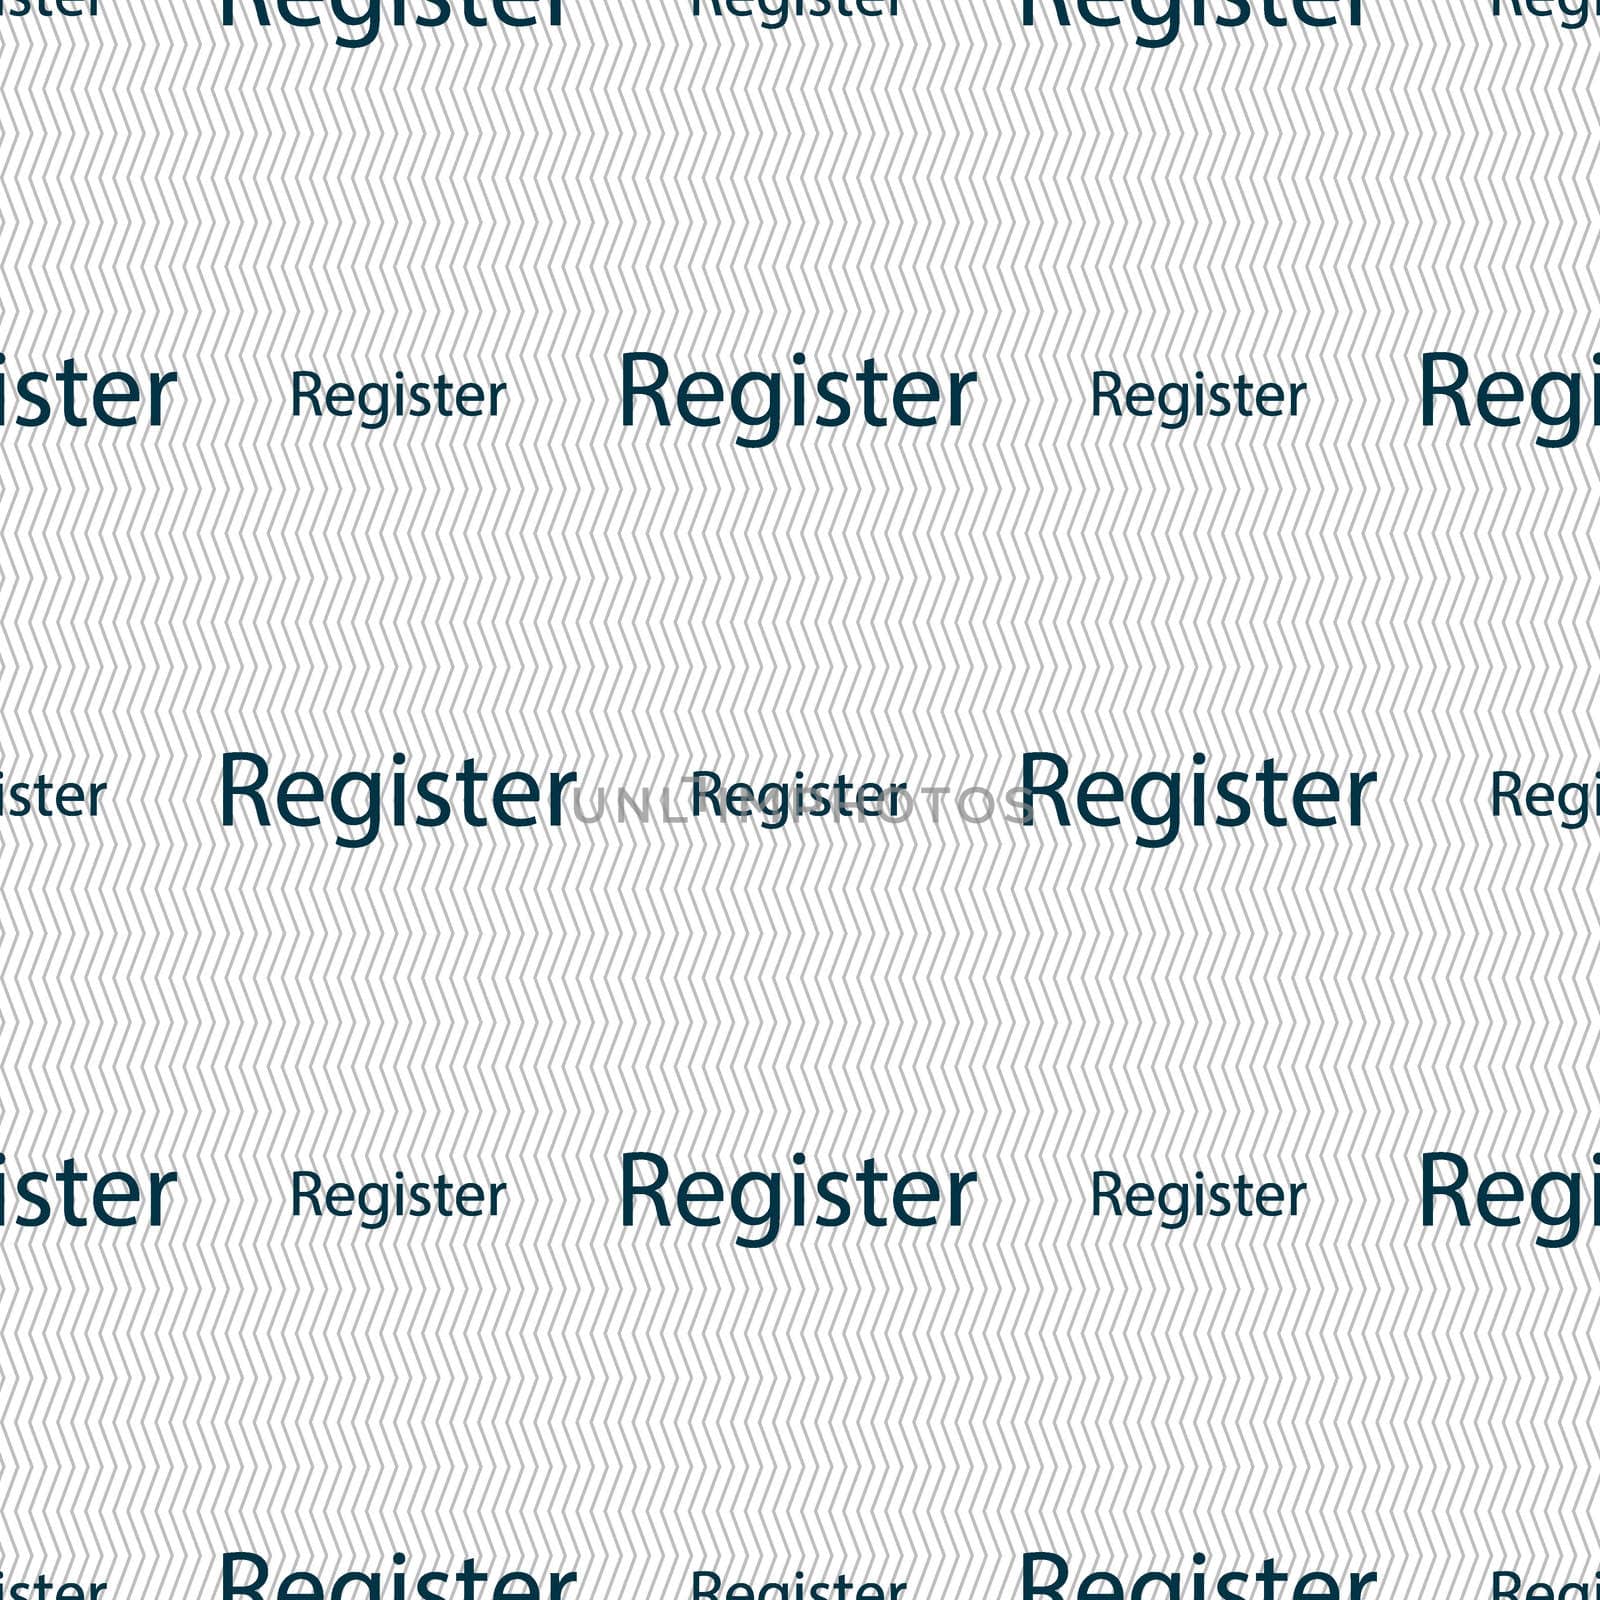 Register sign icon. Membership symbol. Website navigation. Seamless abstract background with geometric shapes. illustration